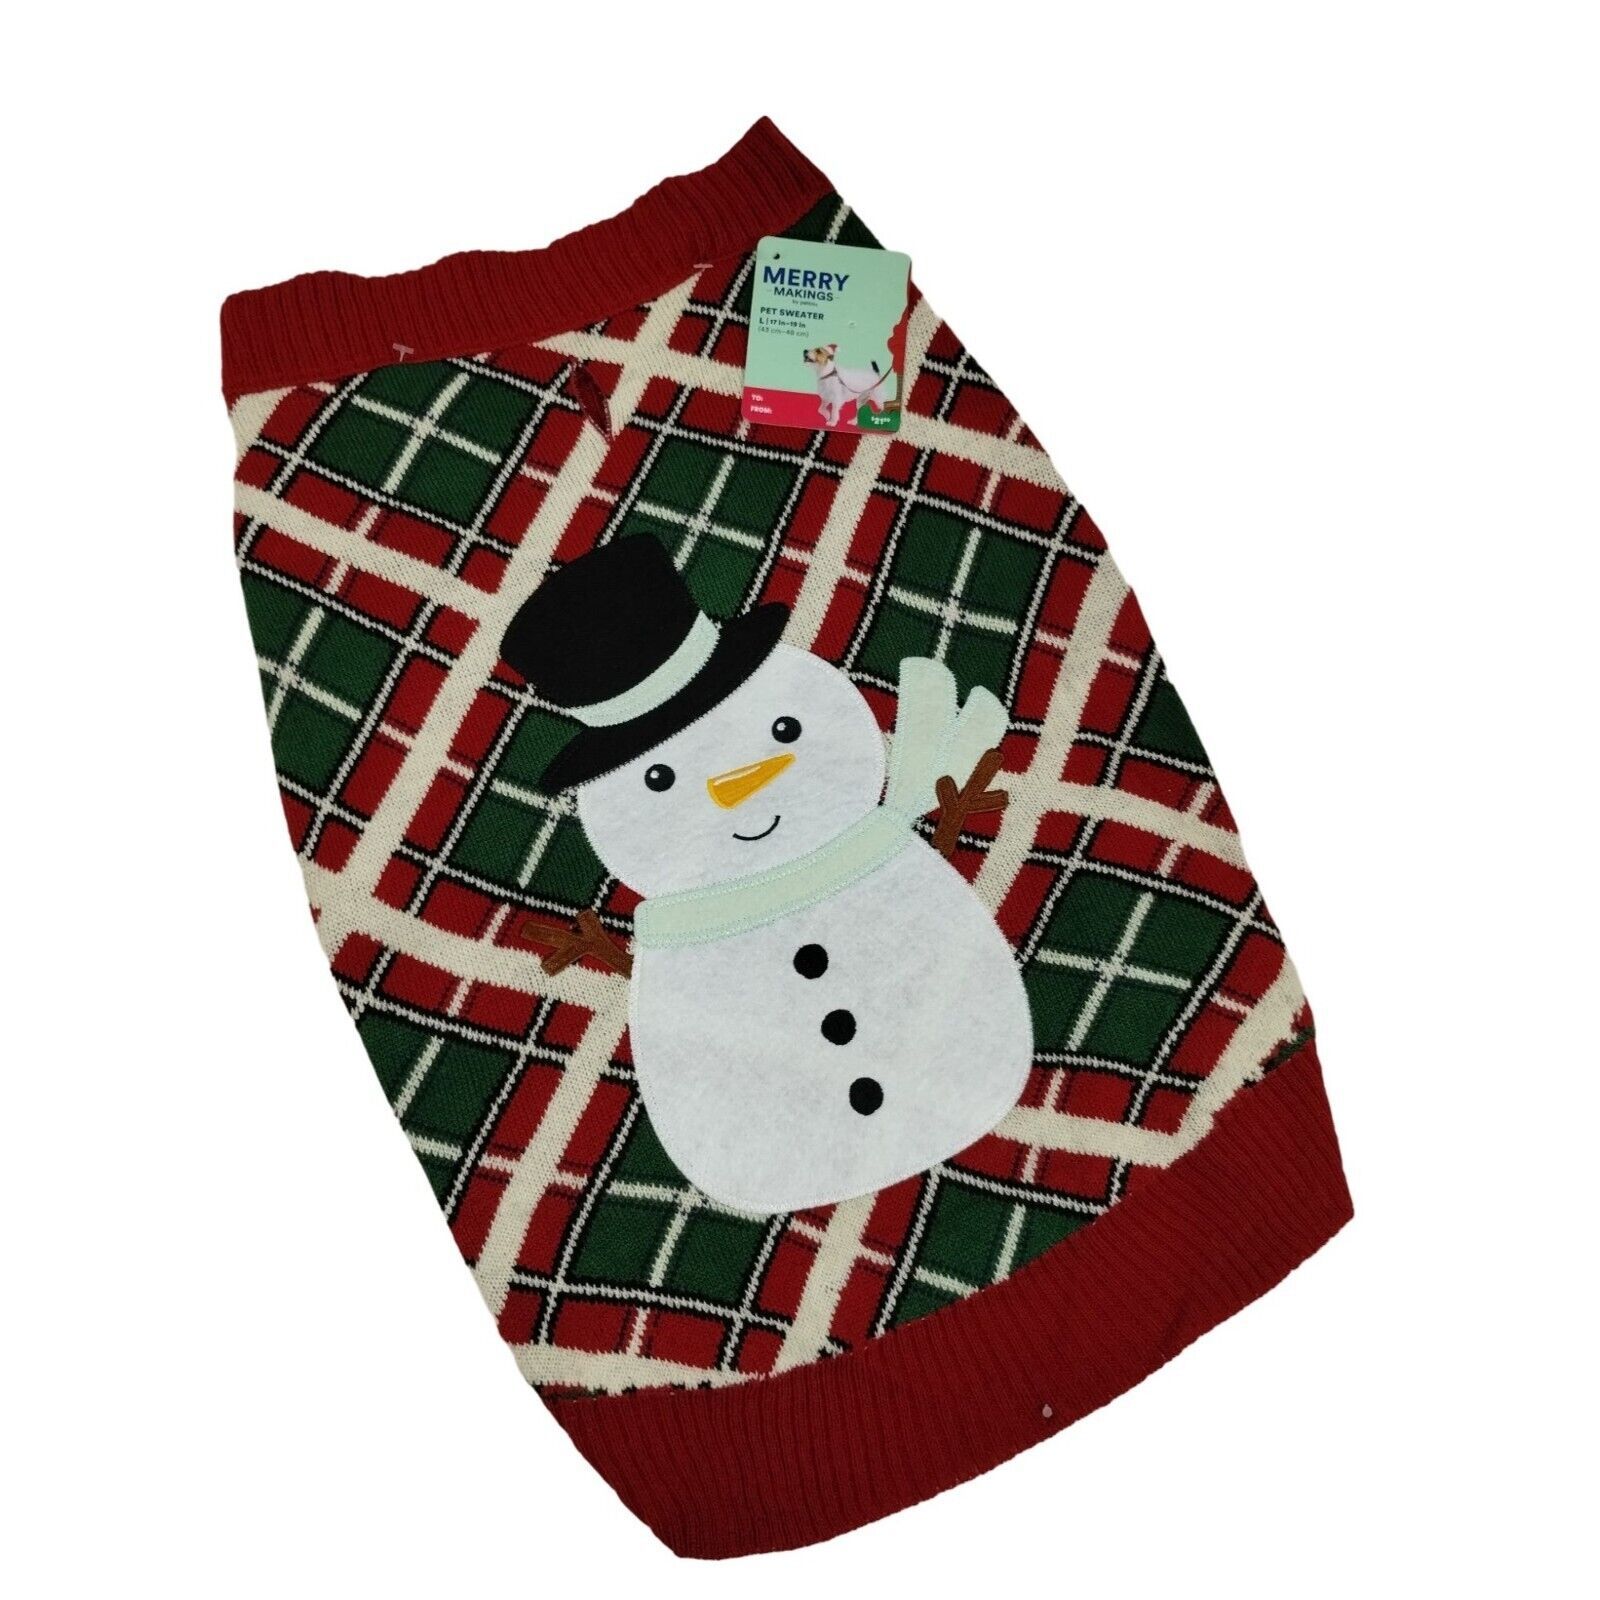 Primary image for Merry Makings Snowman Plaid Pet Sweater Dog Large 17 to 19 inches Red Green